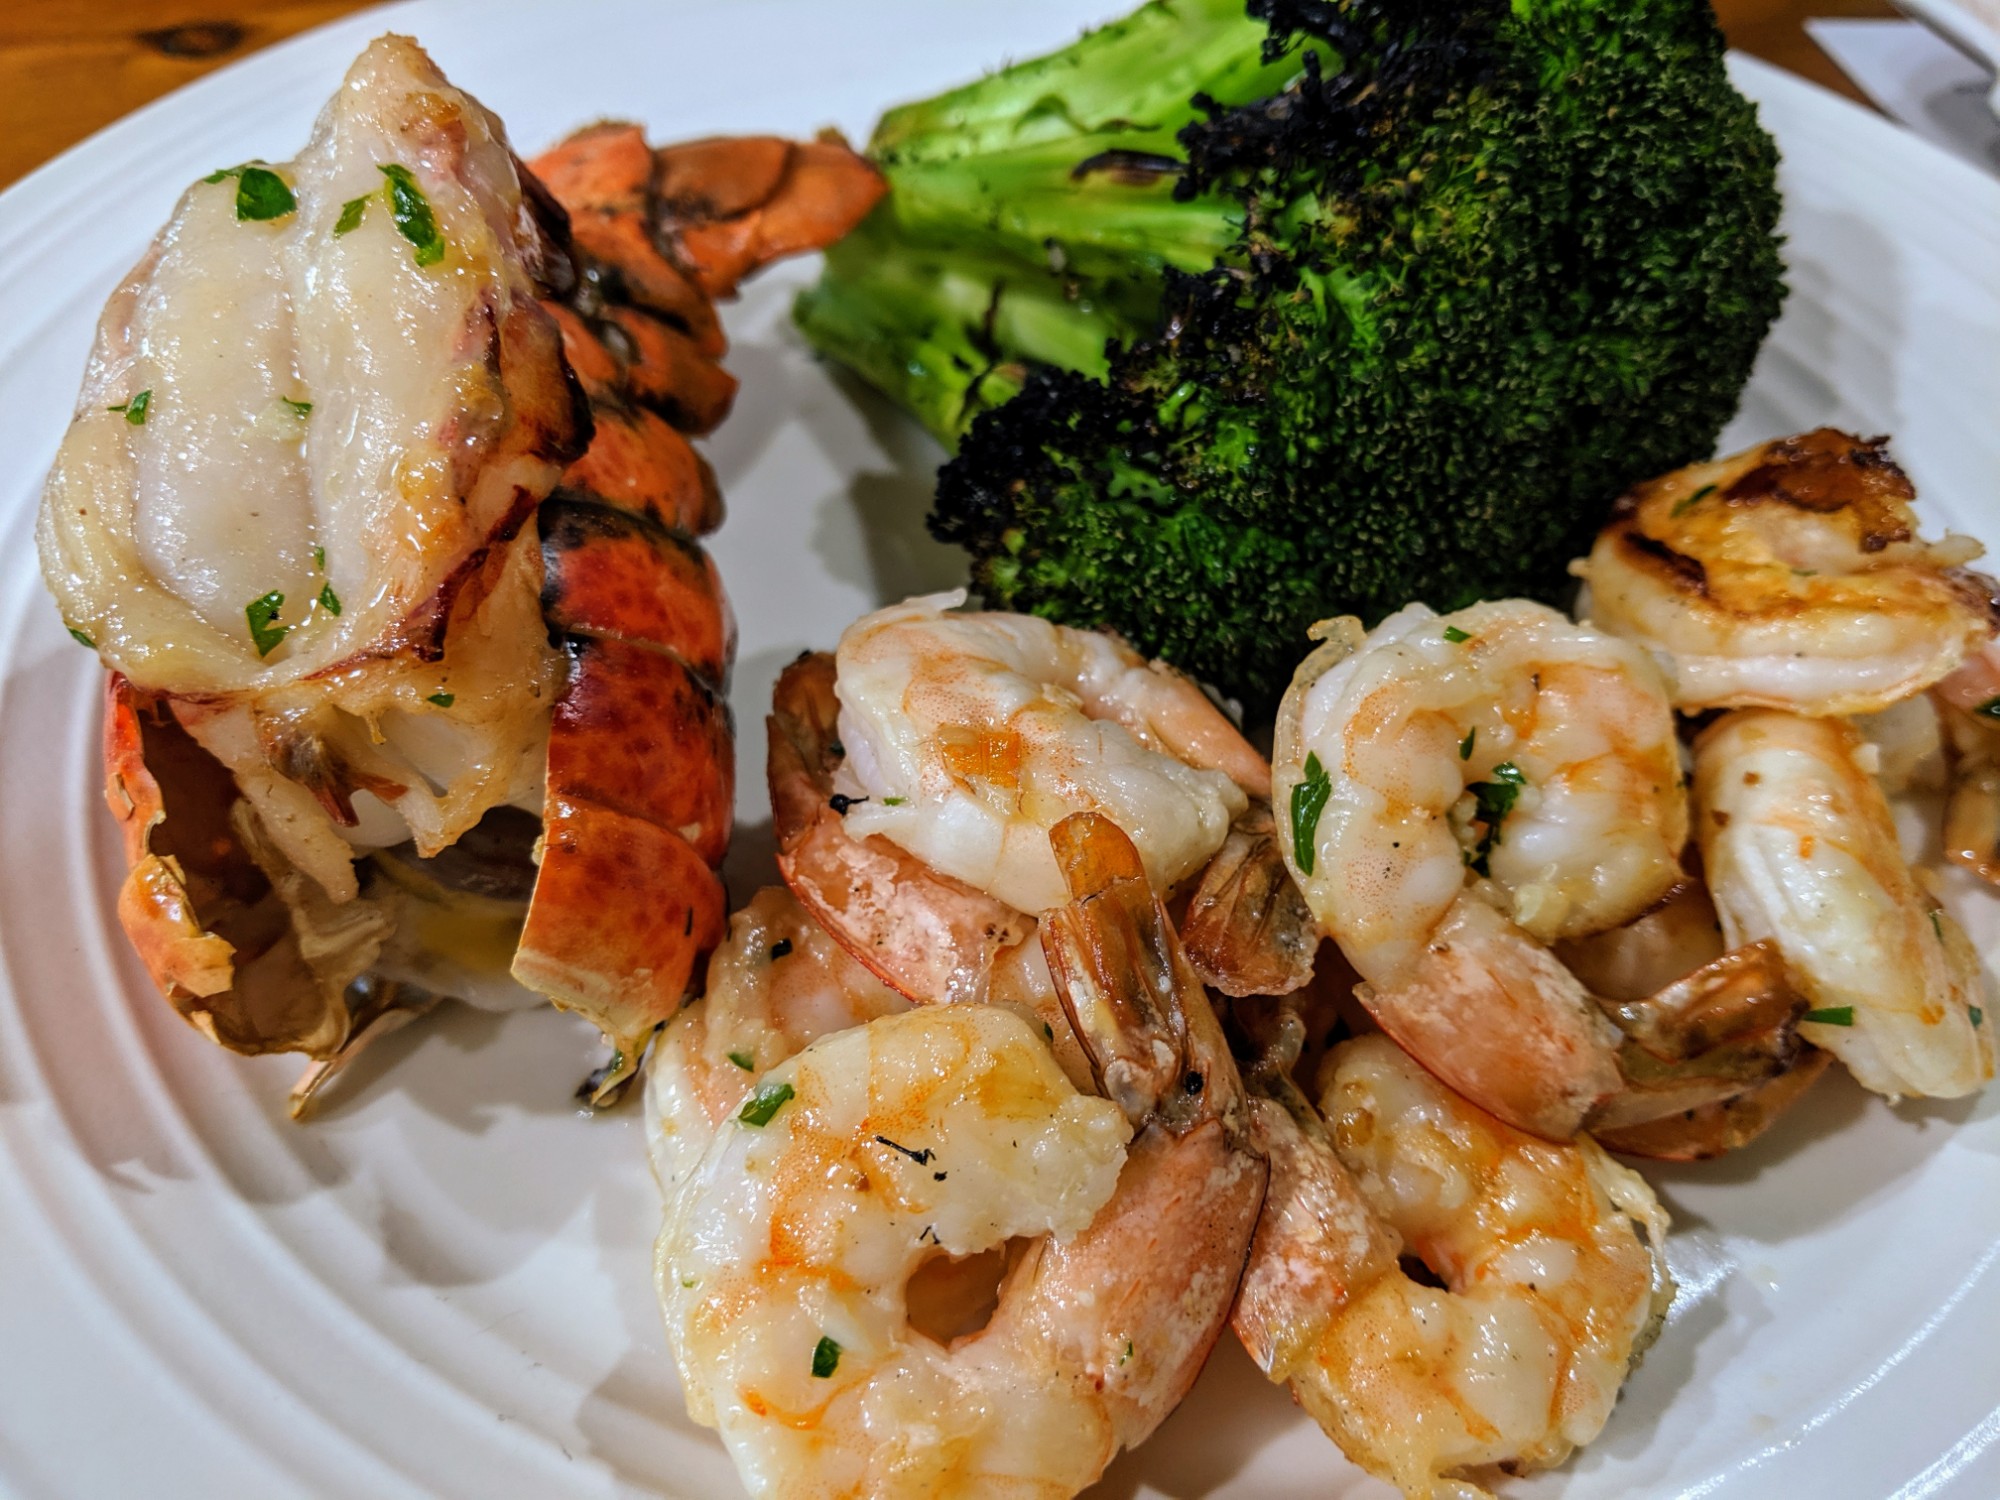 Lobster Tails, Shrimp, and Broccoli on the Grill